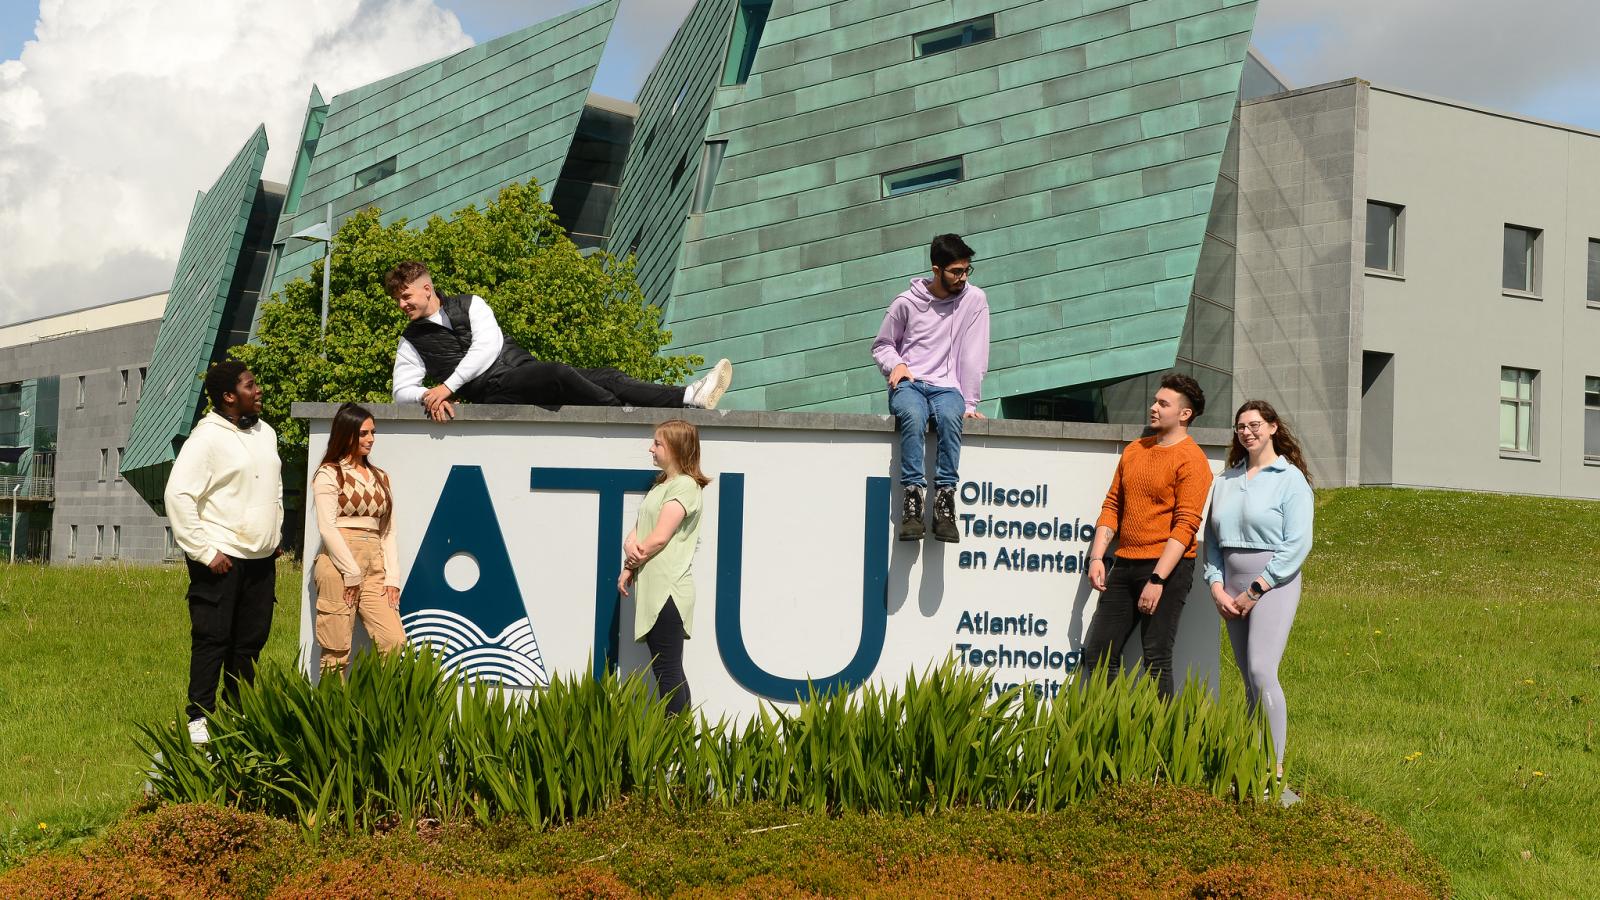 ATU Receives €8.5 Million Boost from €50 Million Technological Sector Advancement Fund